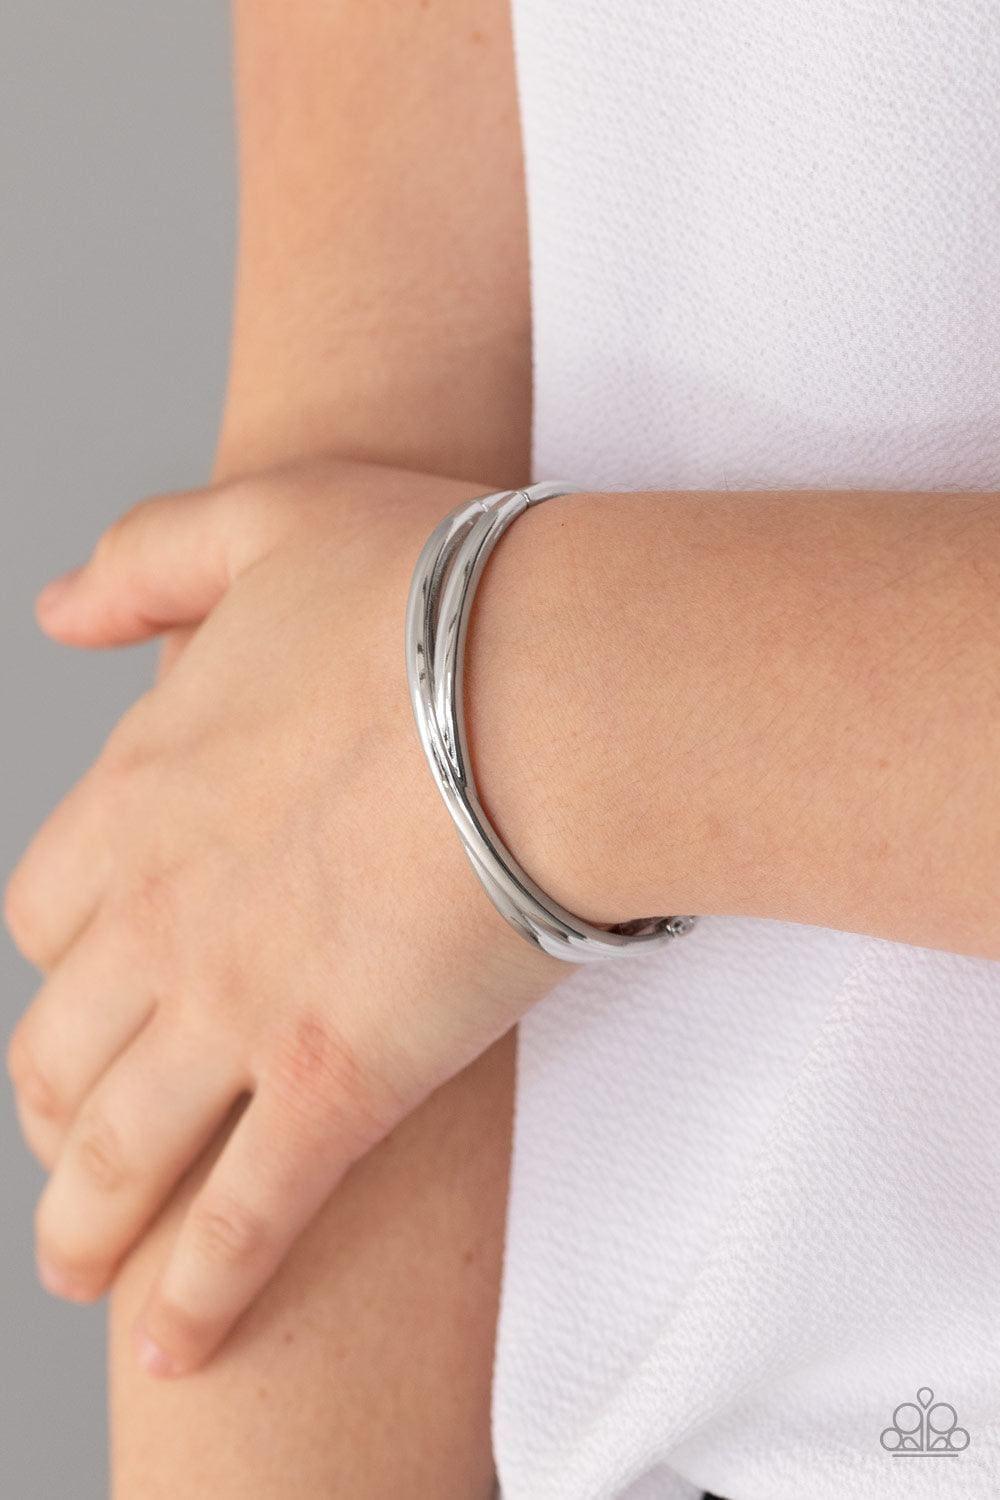 Paparazzi Accessories - Crossing Over - Silver Bracelet - Bling by JessieK